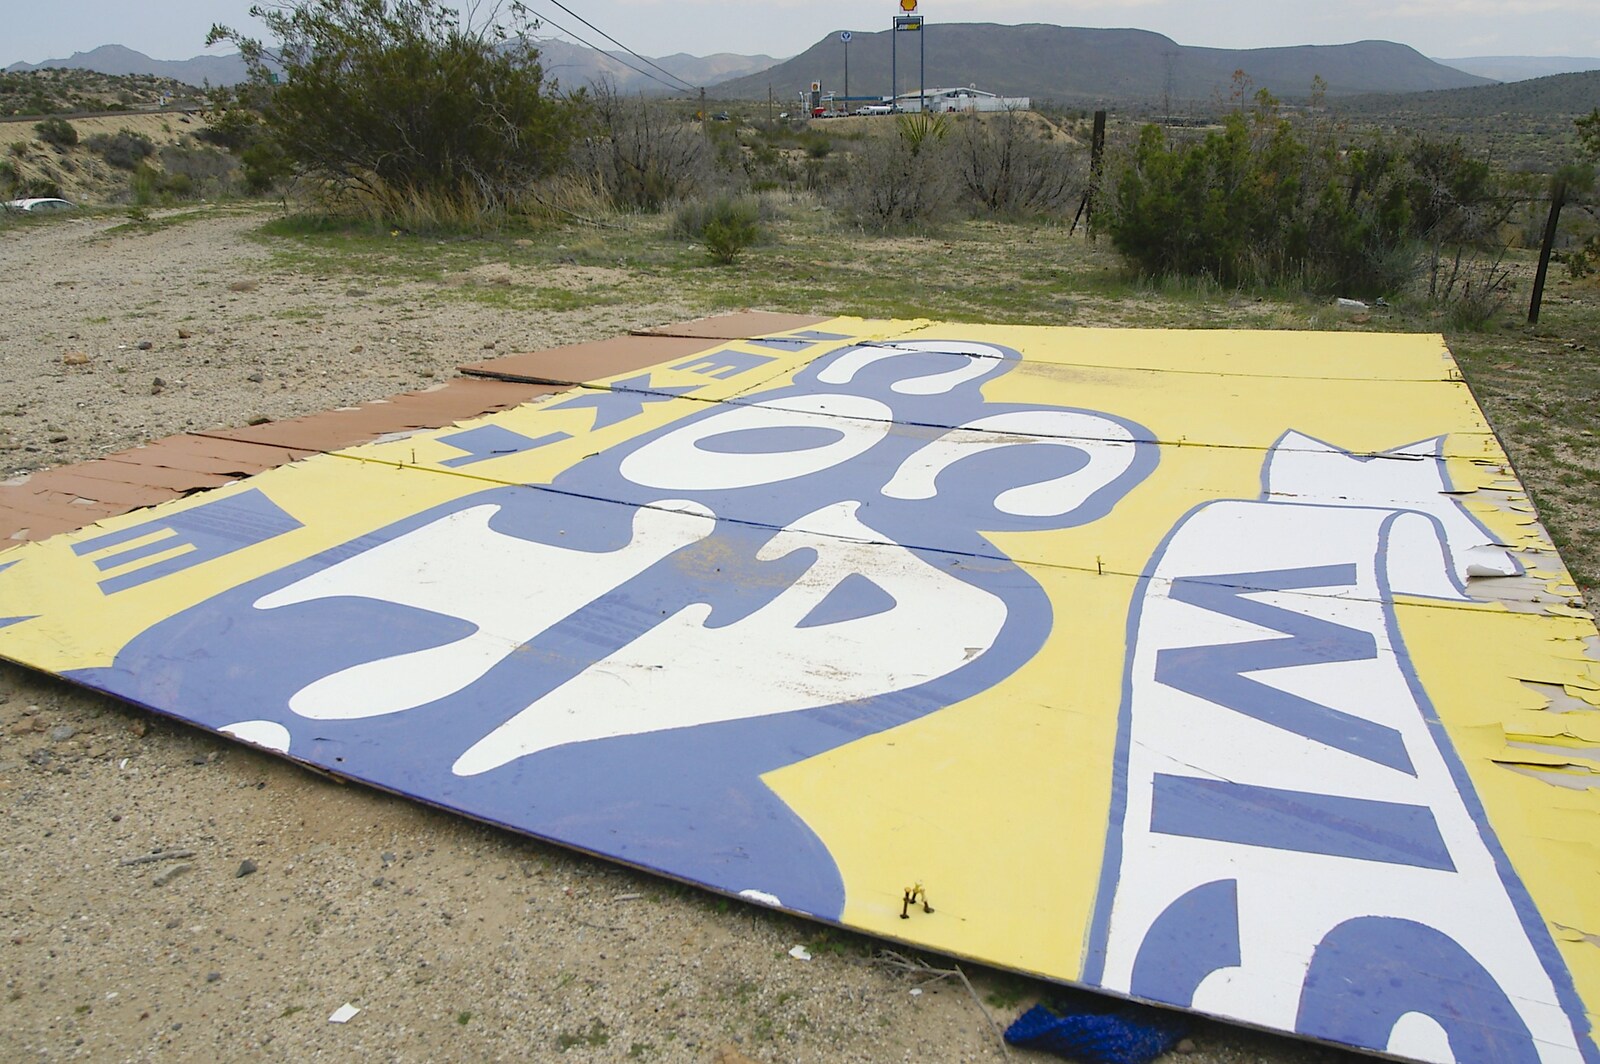 The other half of the missing sign from San Diego Seven: The Desert and the Dunes, Arizona and California, US - 22nd April